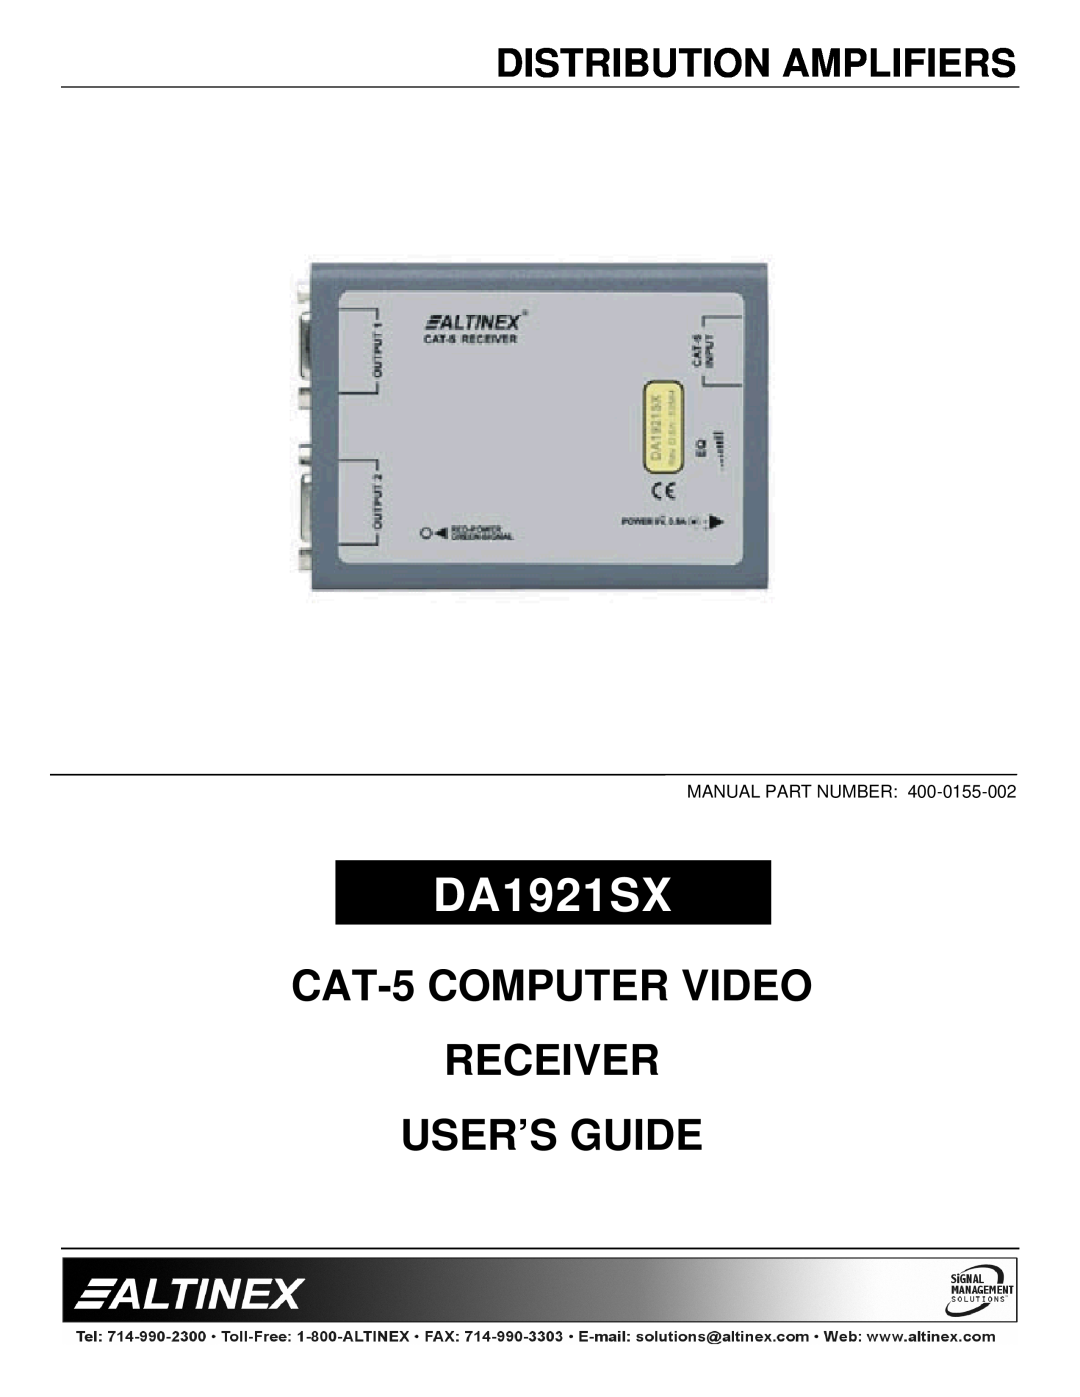 Altinex DA1921SX manual Distribution Amplifiers, CAT-5COMPUTER VIDEO RECEIVER USER’S GUIDE, Manual Part Number 